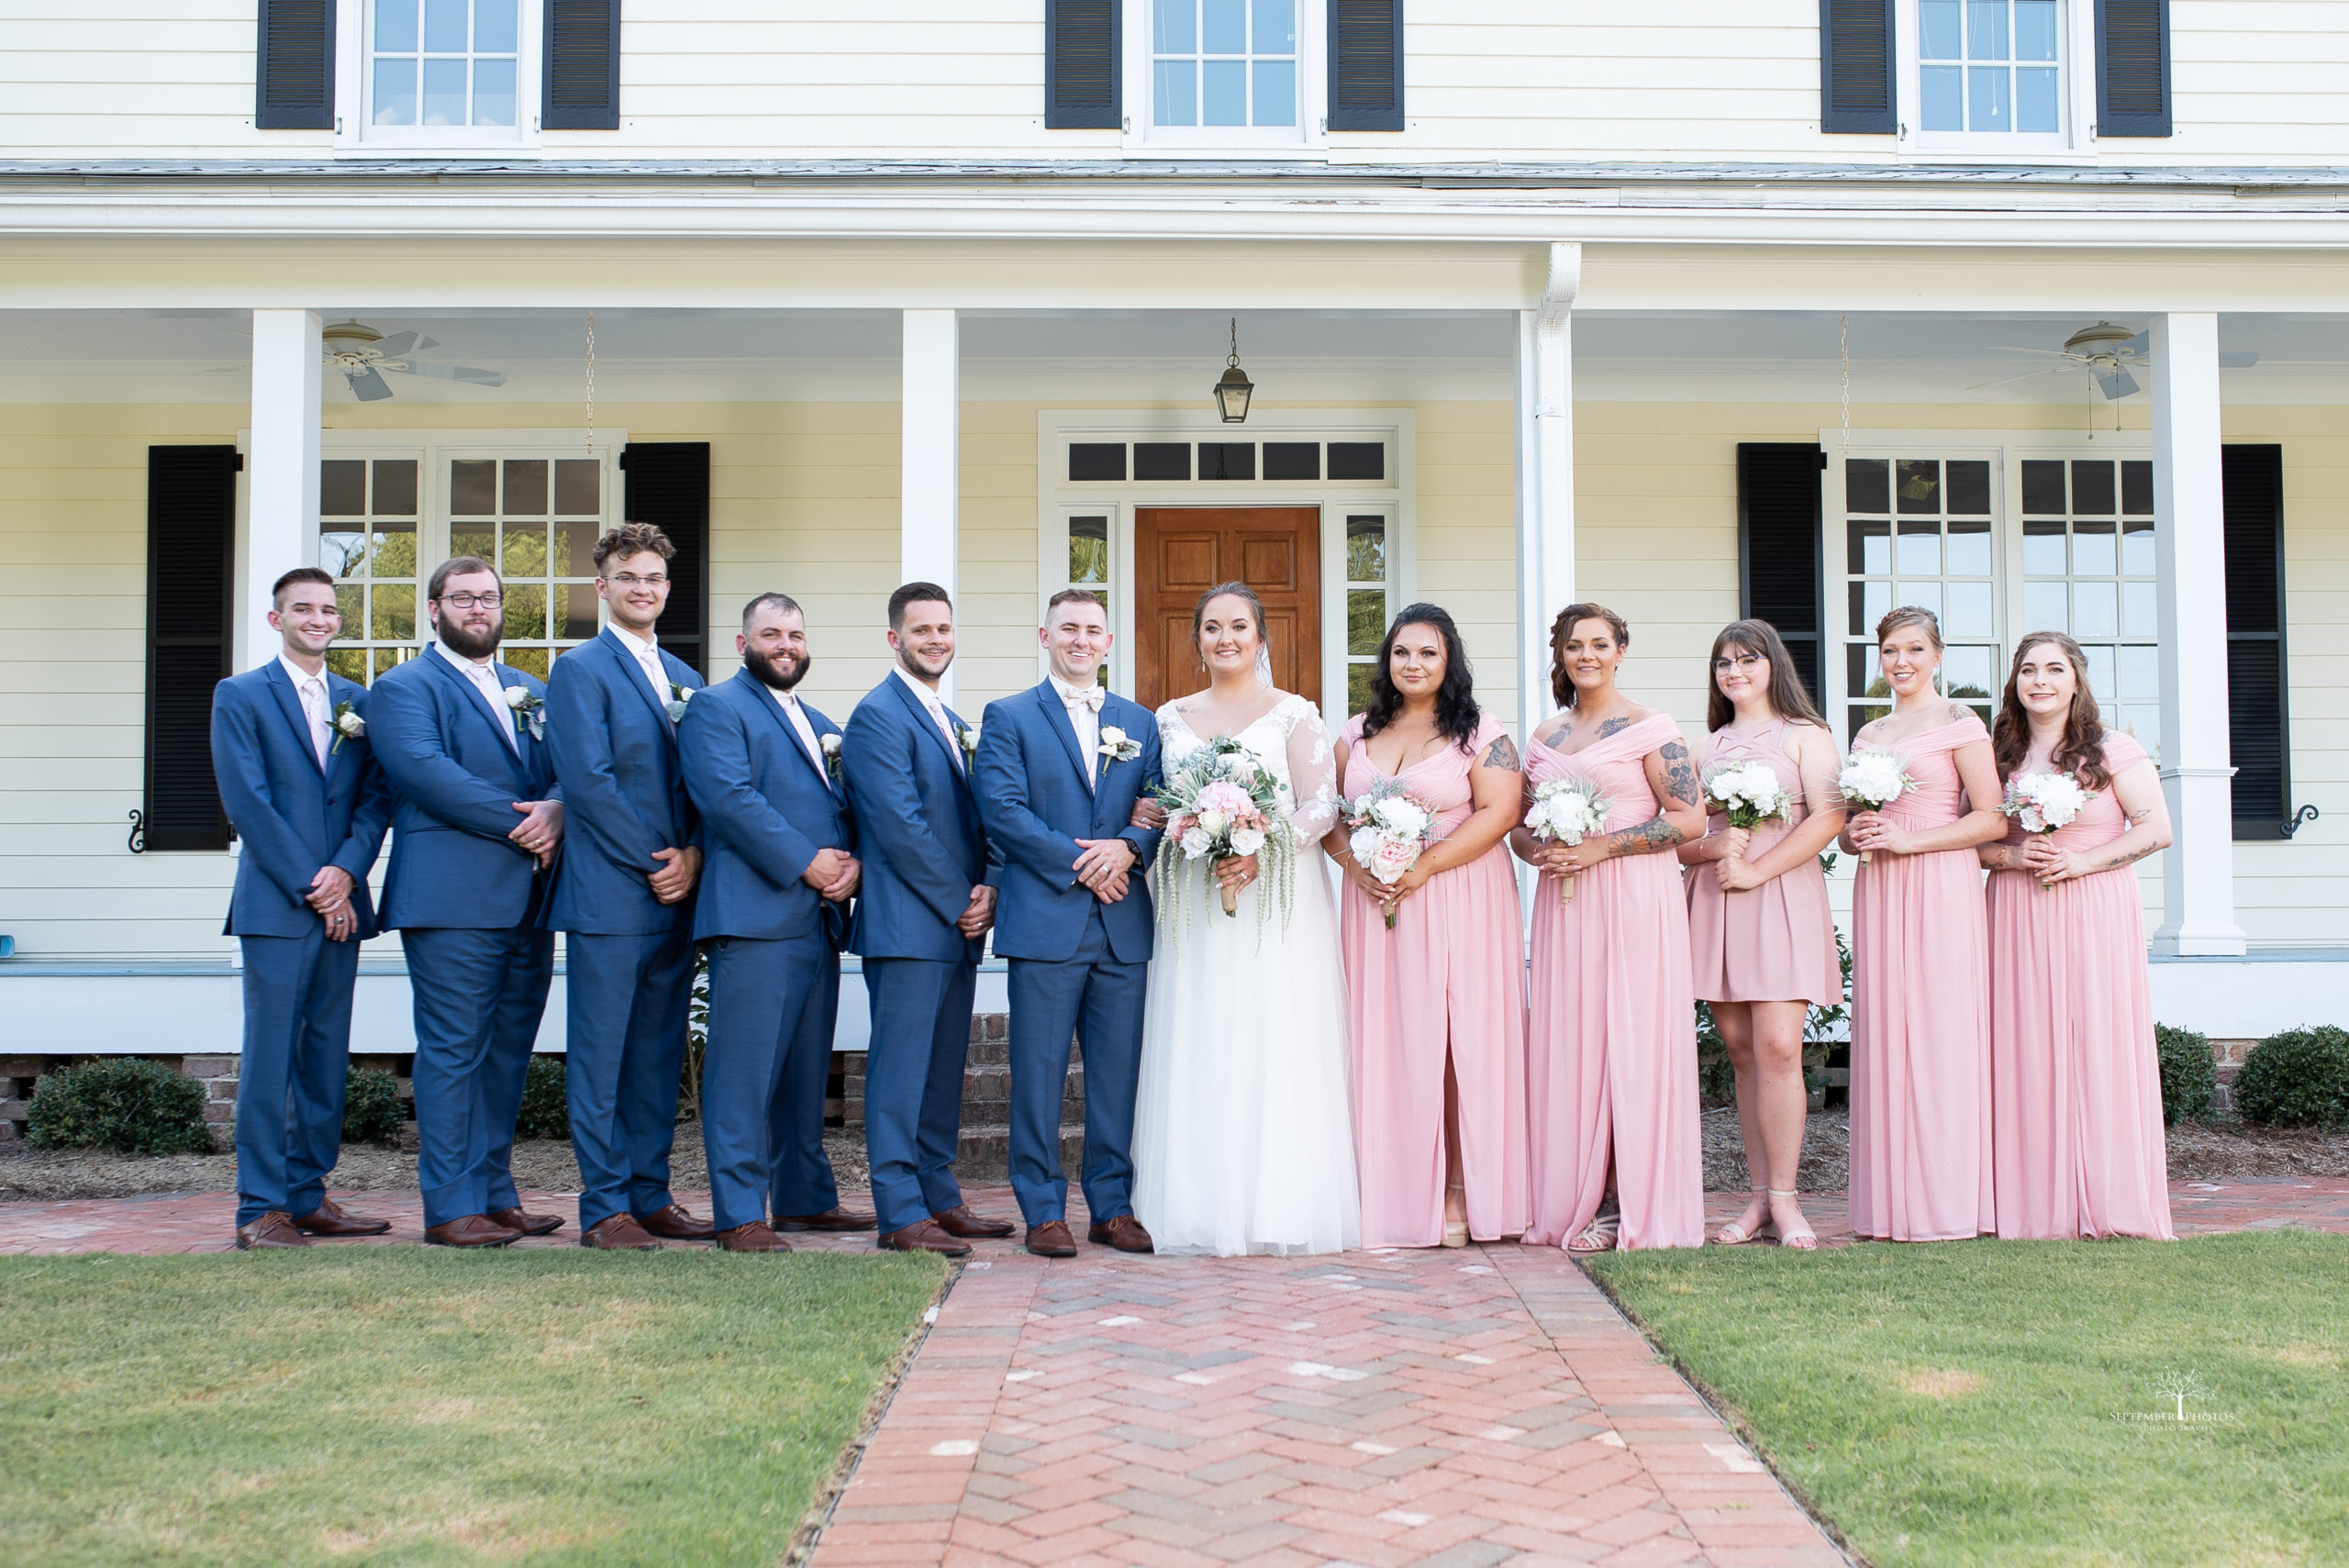 Wedding party photos in front of the Estate House for Samantha and Johnathan's blush, navy, and gold wedding at Walnut Hill.